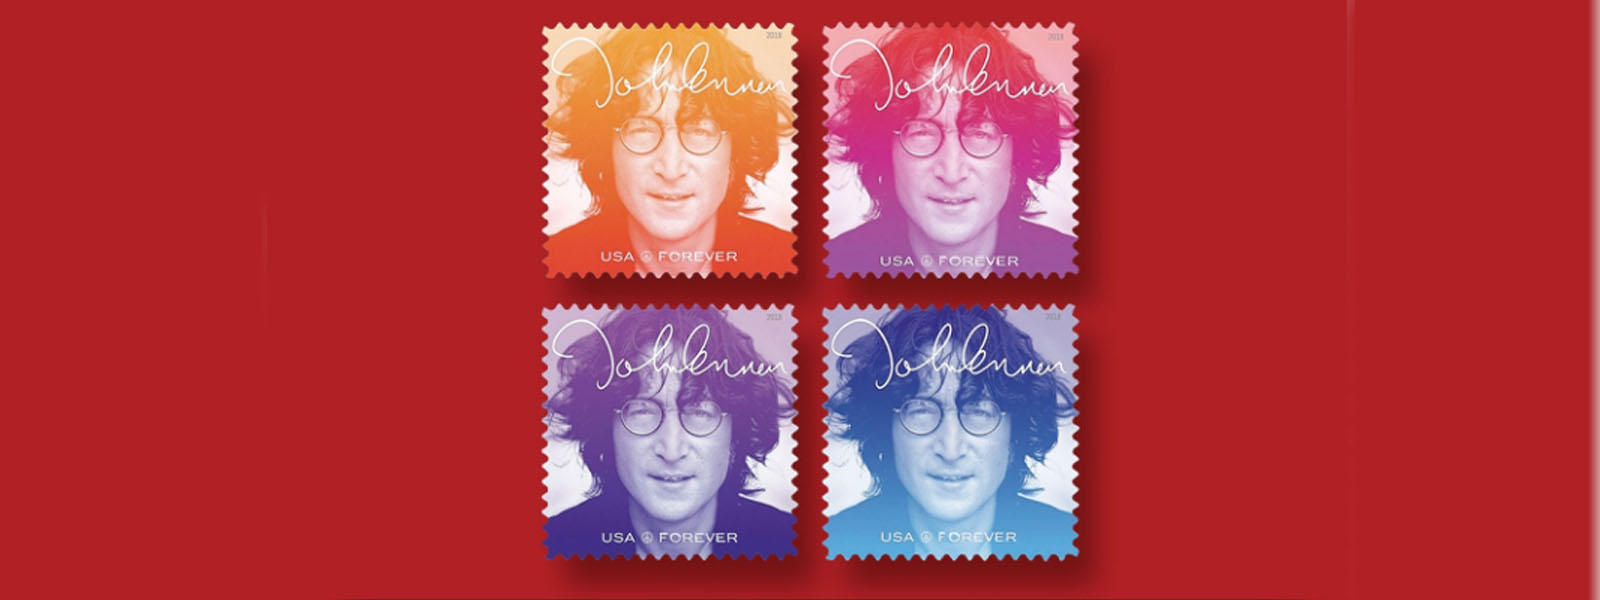 John Lennon honored with postage stamp